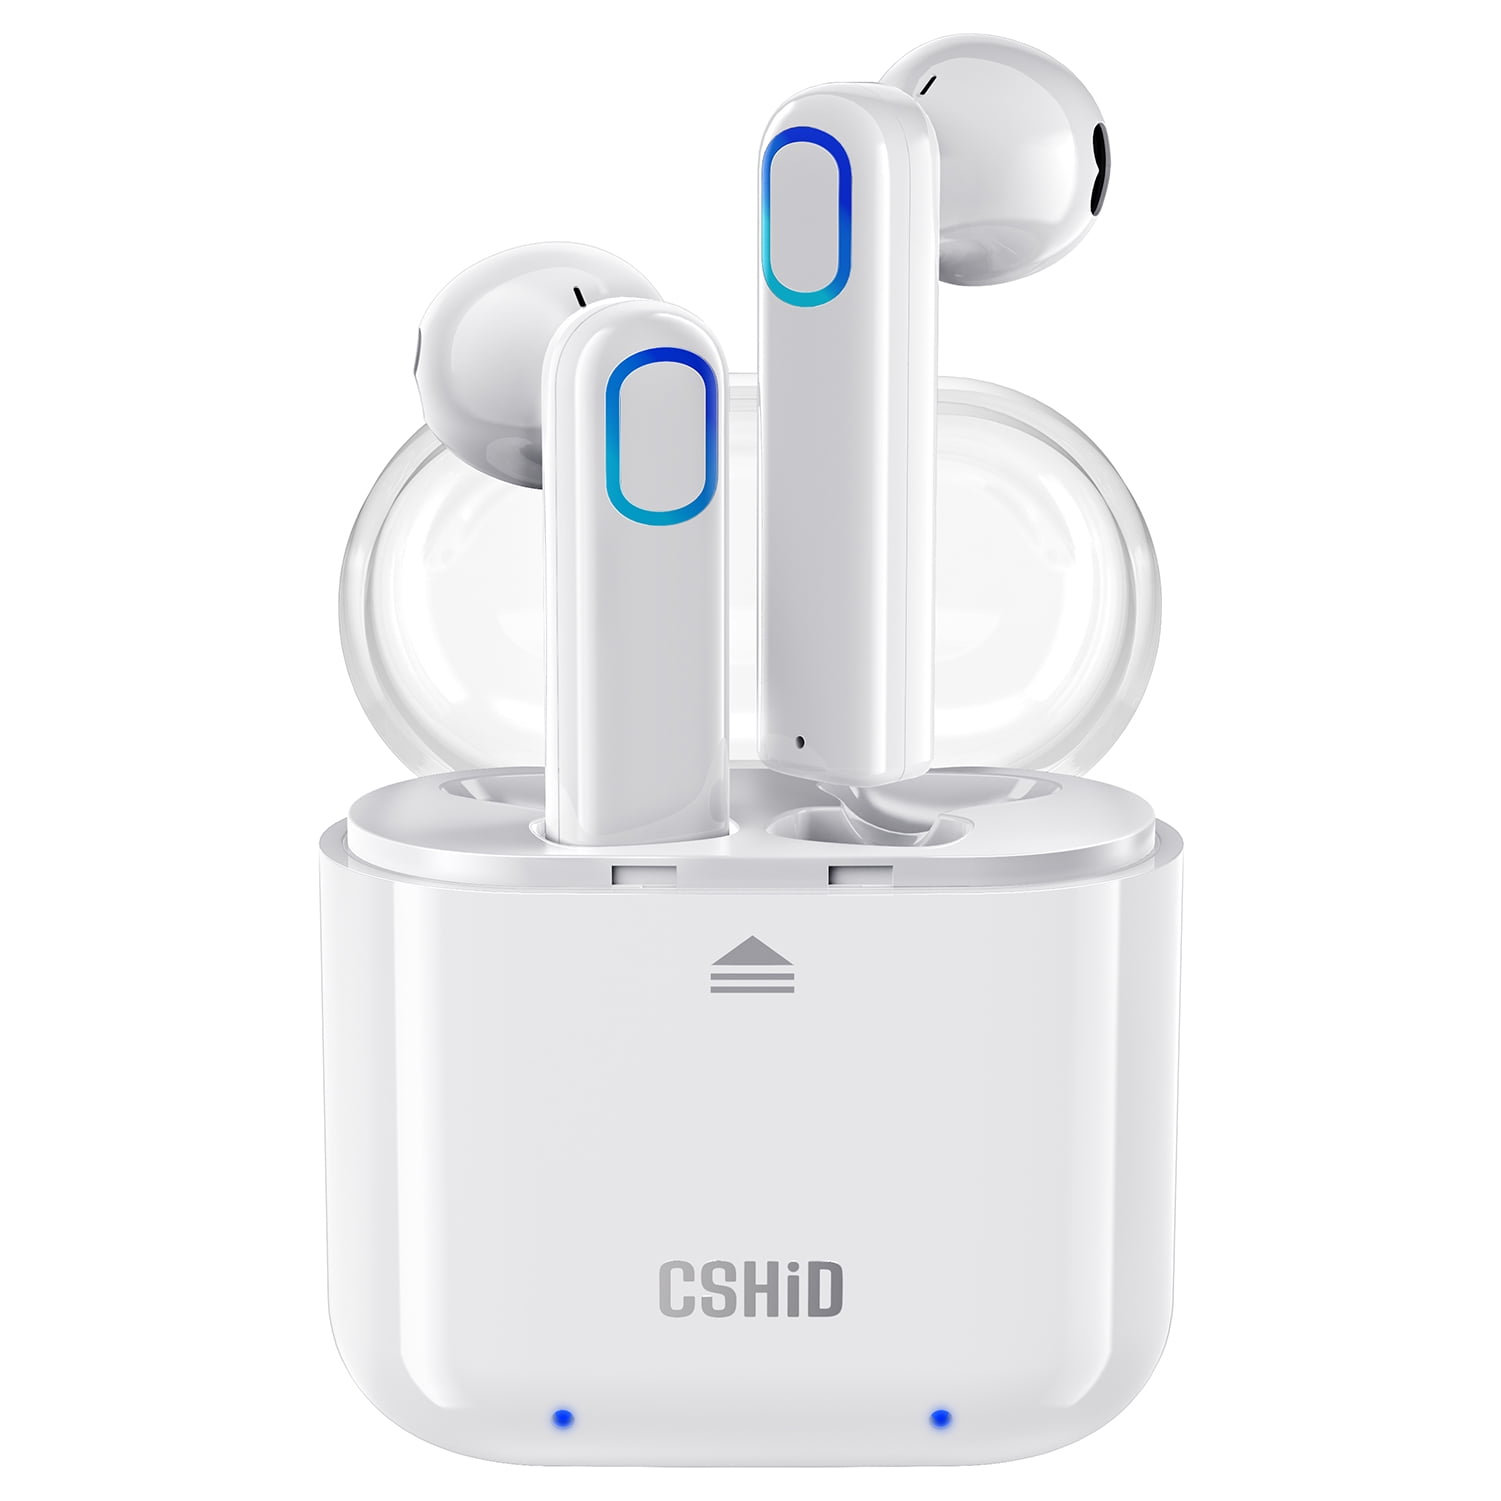 UEUDAHH-1Bluetooth 5.0 Headset Earbuds Headphones Built-in Microphone Charging Box,Touch Control,IPX5 Waterproof，3D Stereo Noise Reduction,30H WorkTime,Pop-ups Auto Pairing for iPhone Airpods/Android 